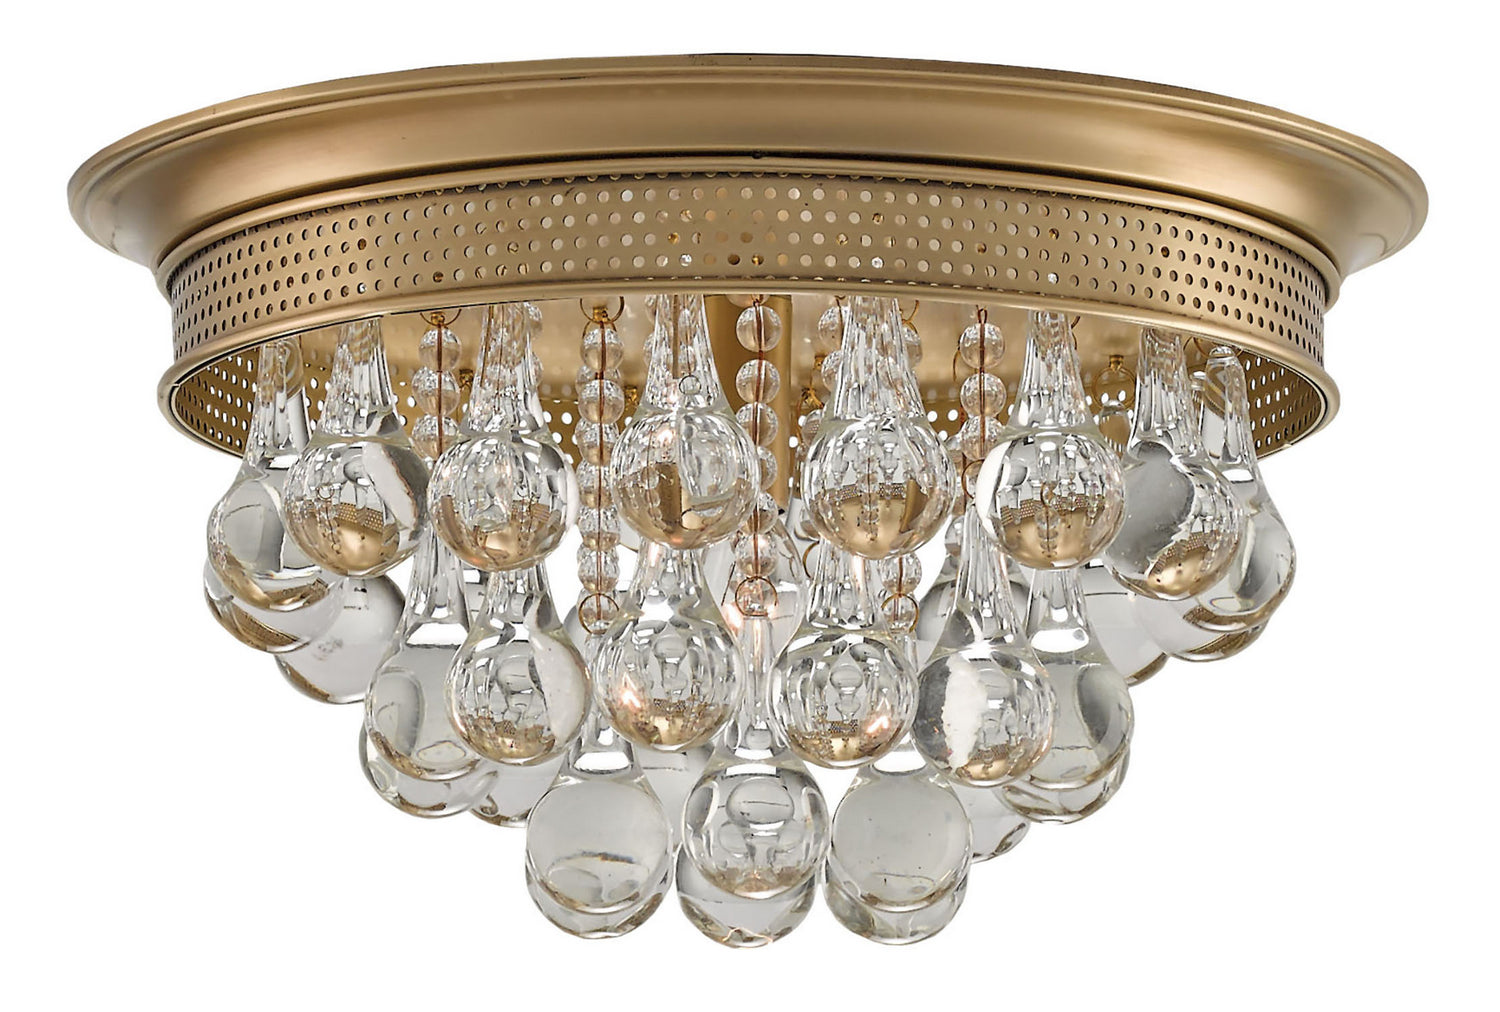 One Light Flush Mount from the Worthing collection in Antique Brass finish